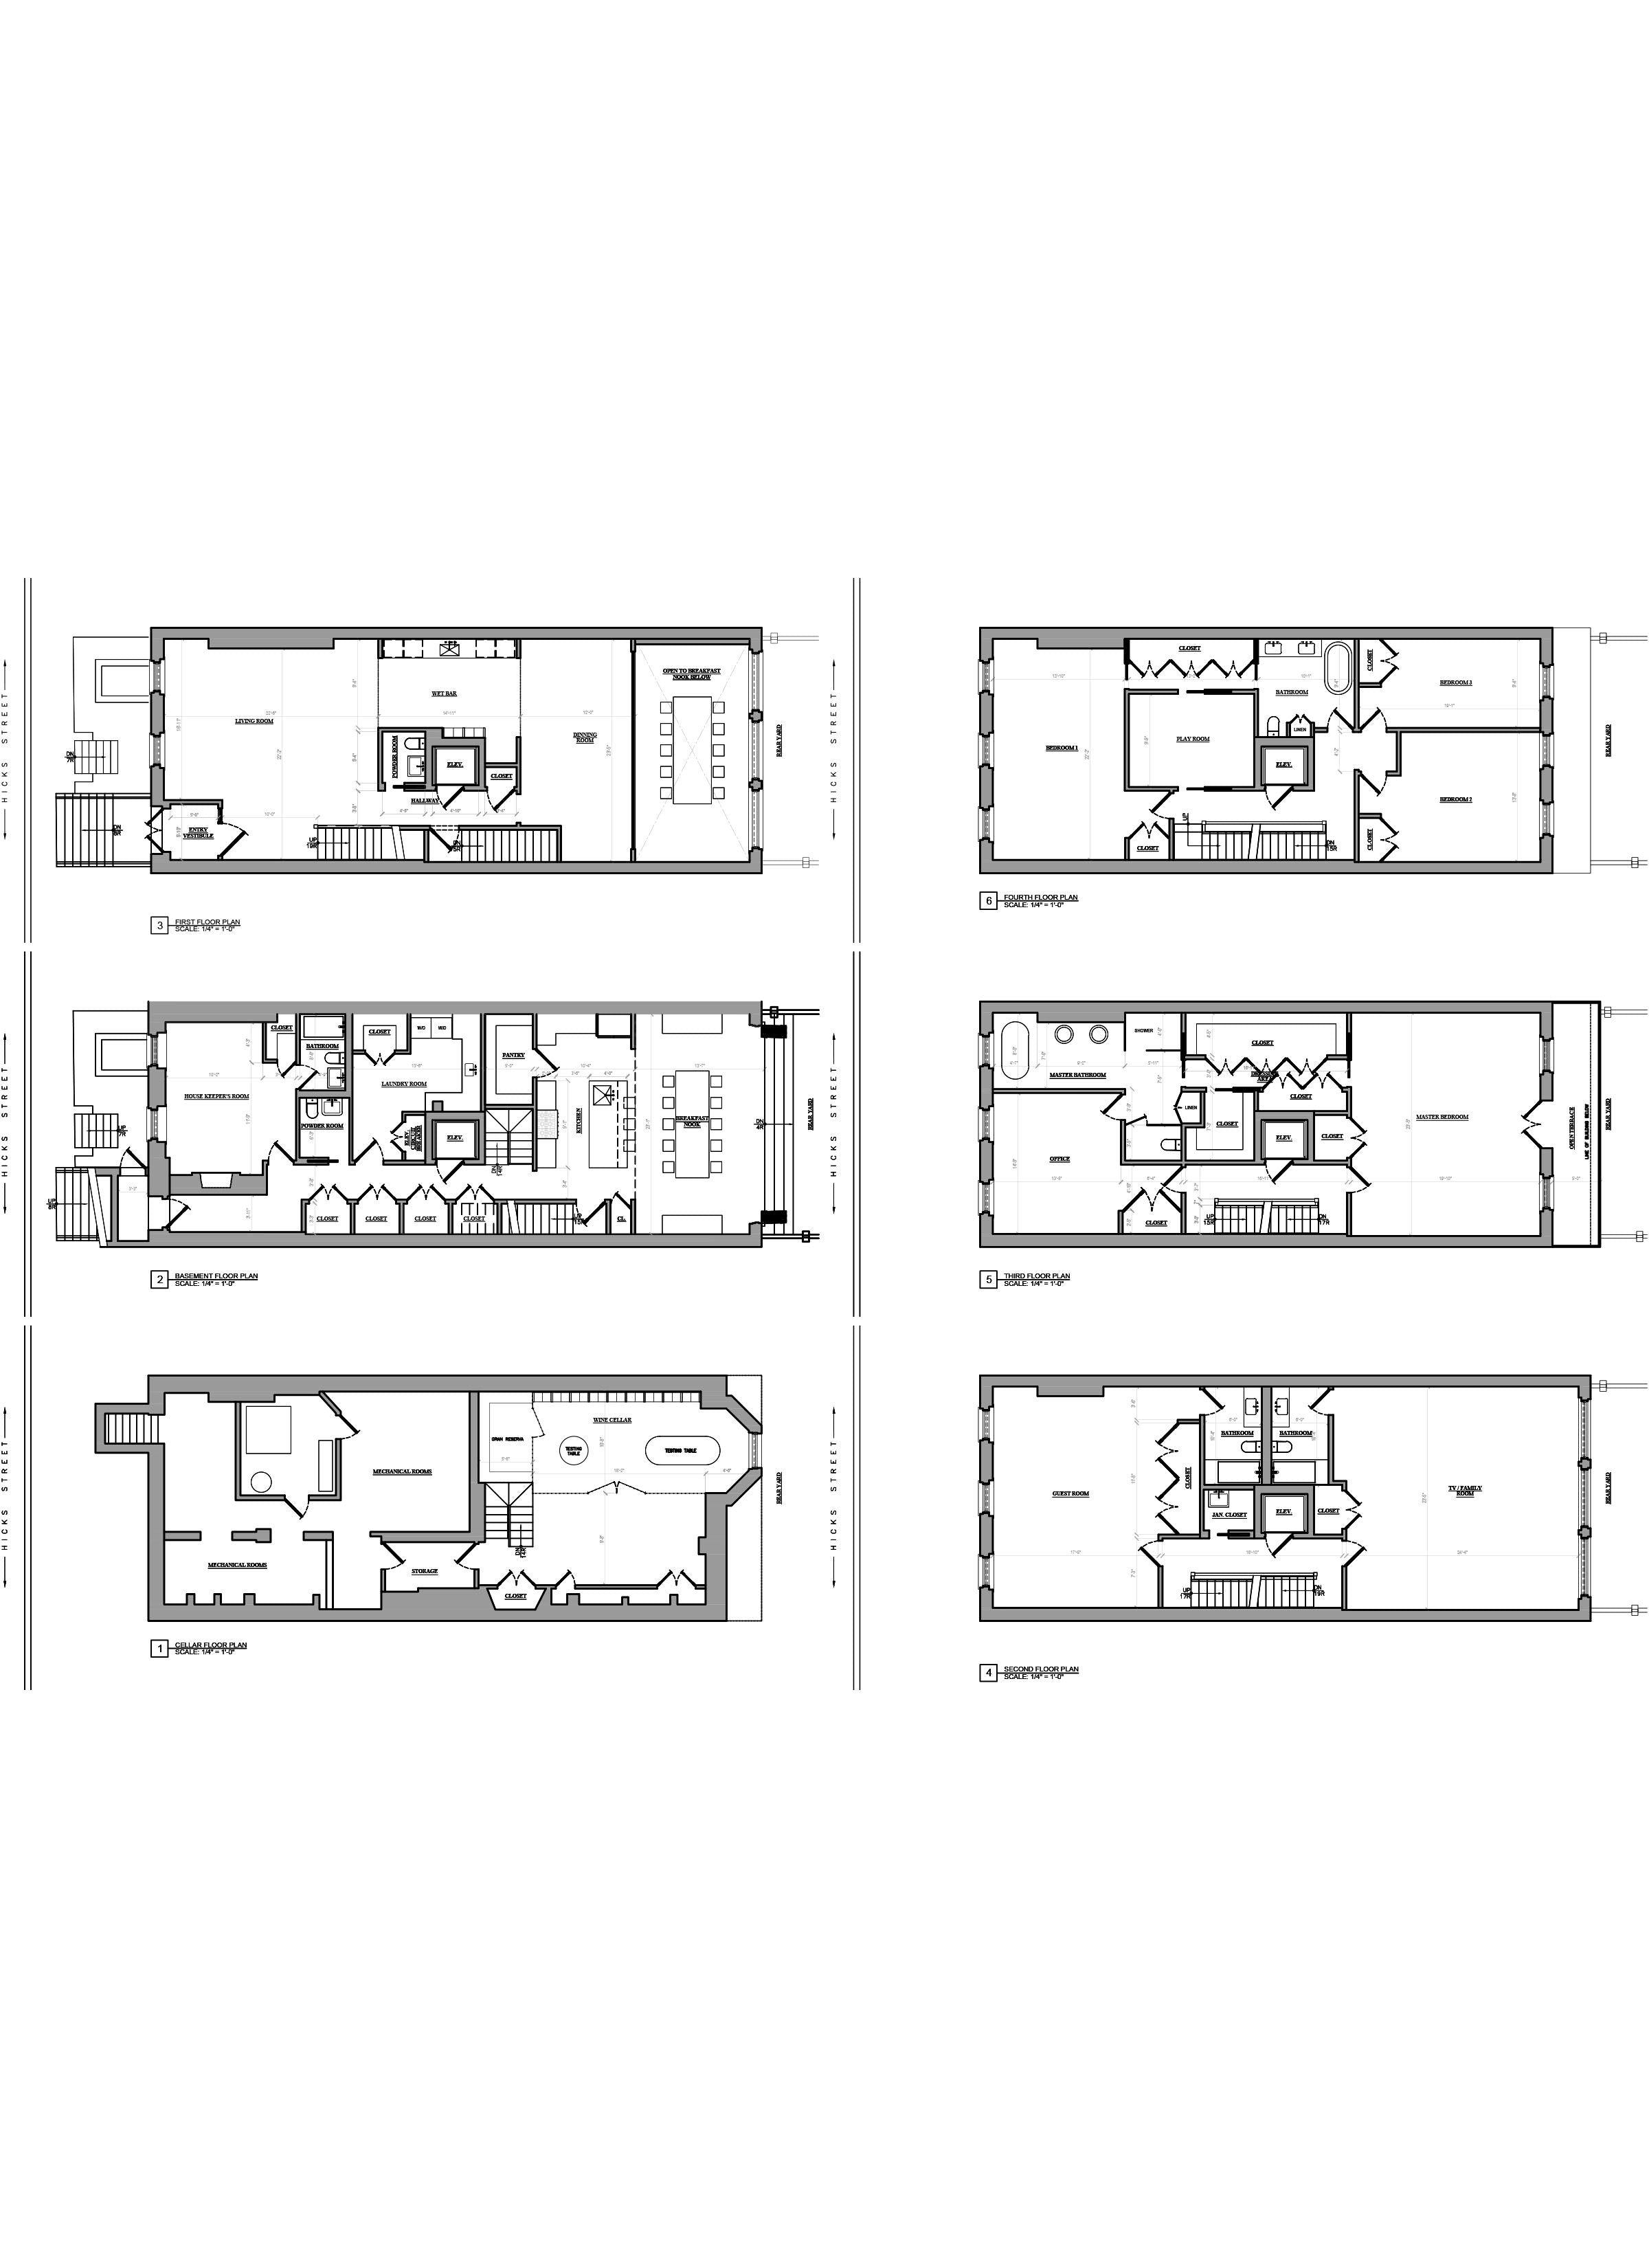 Floor plan design - AutoCAD drafting _Town house_NYC